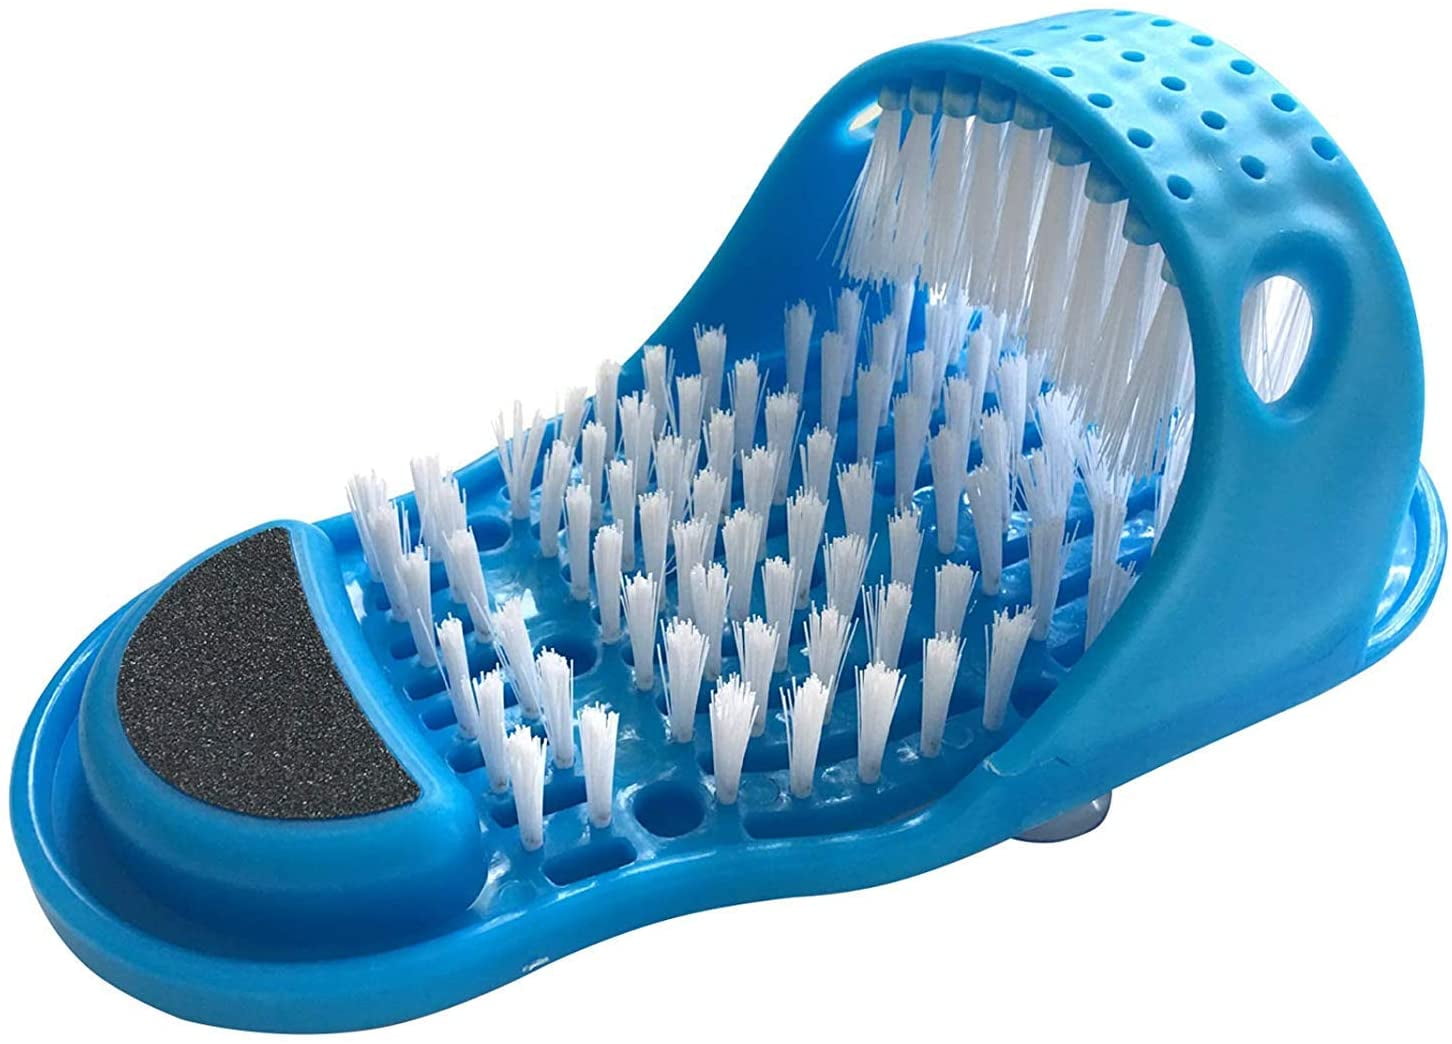 meidong Shower Foot Scrubber, Feet Cleaner for Shower Floor with Dead Skin  Remover File and Suction Cups (1PCS Blue)